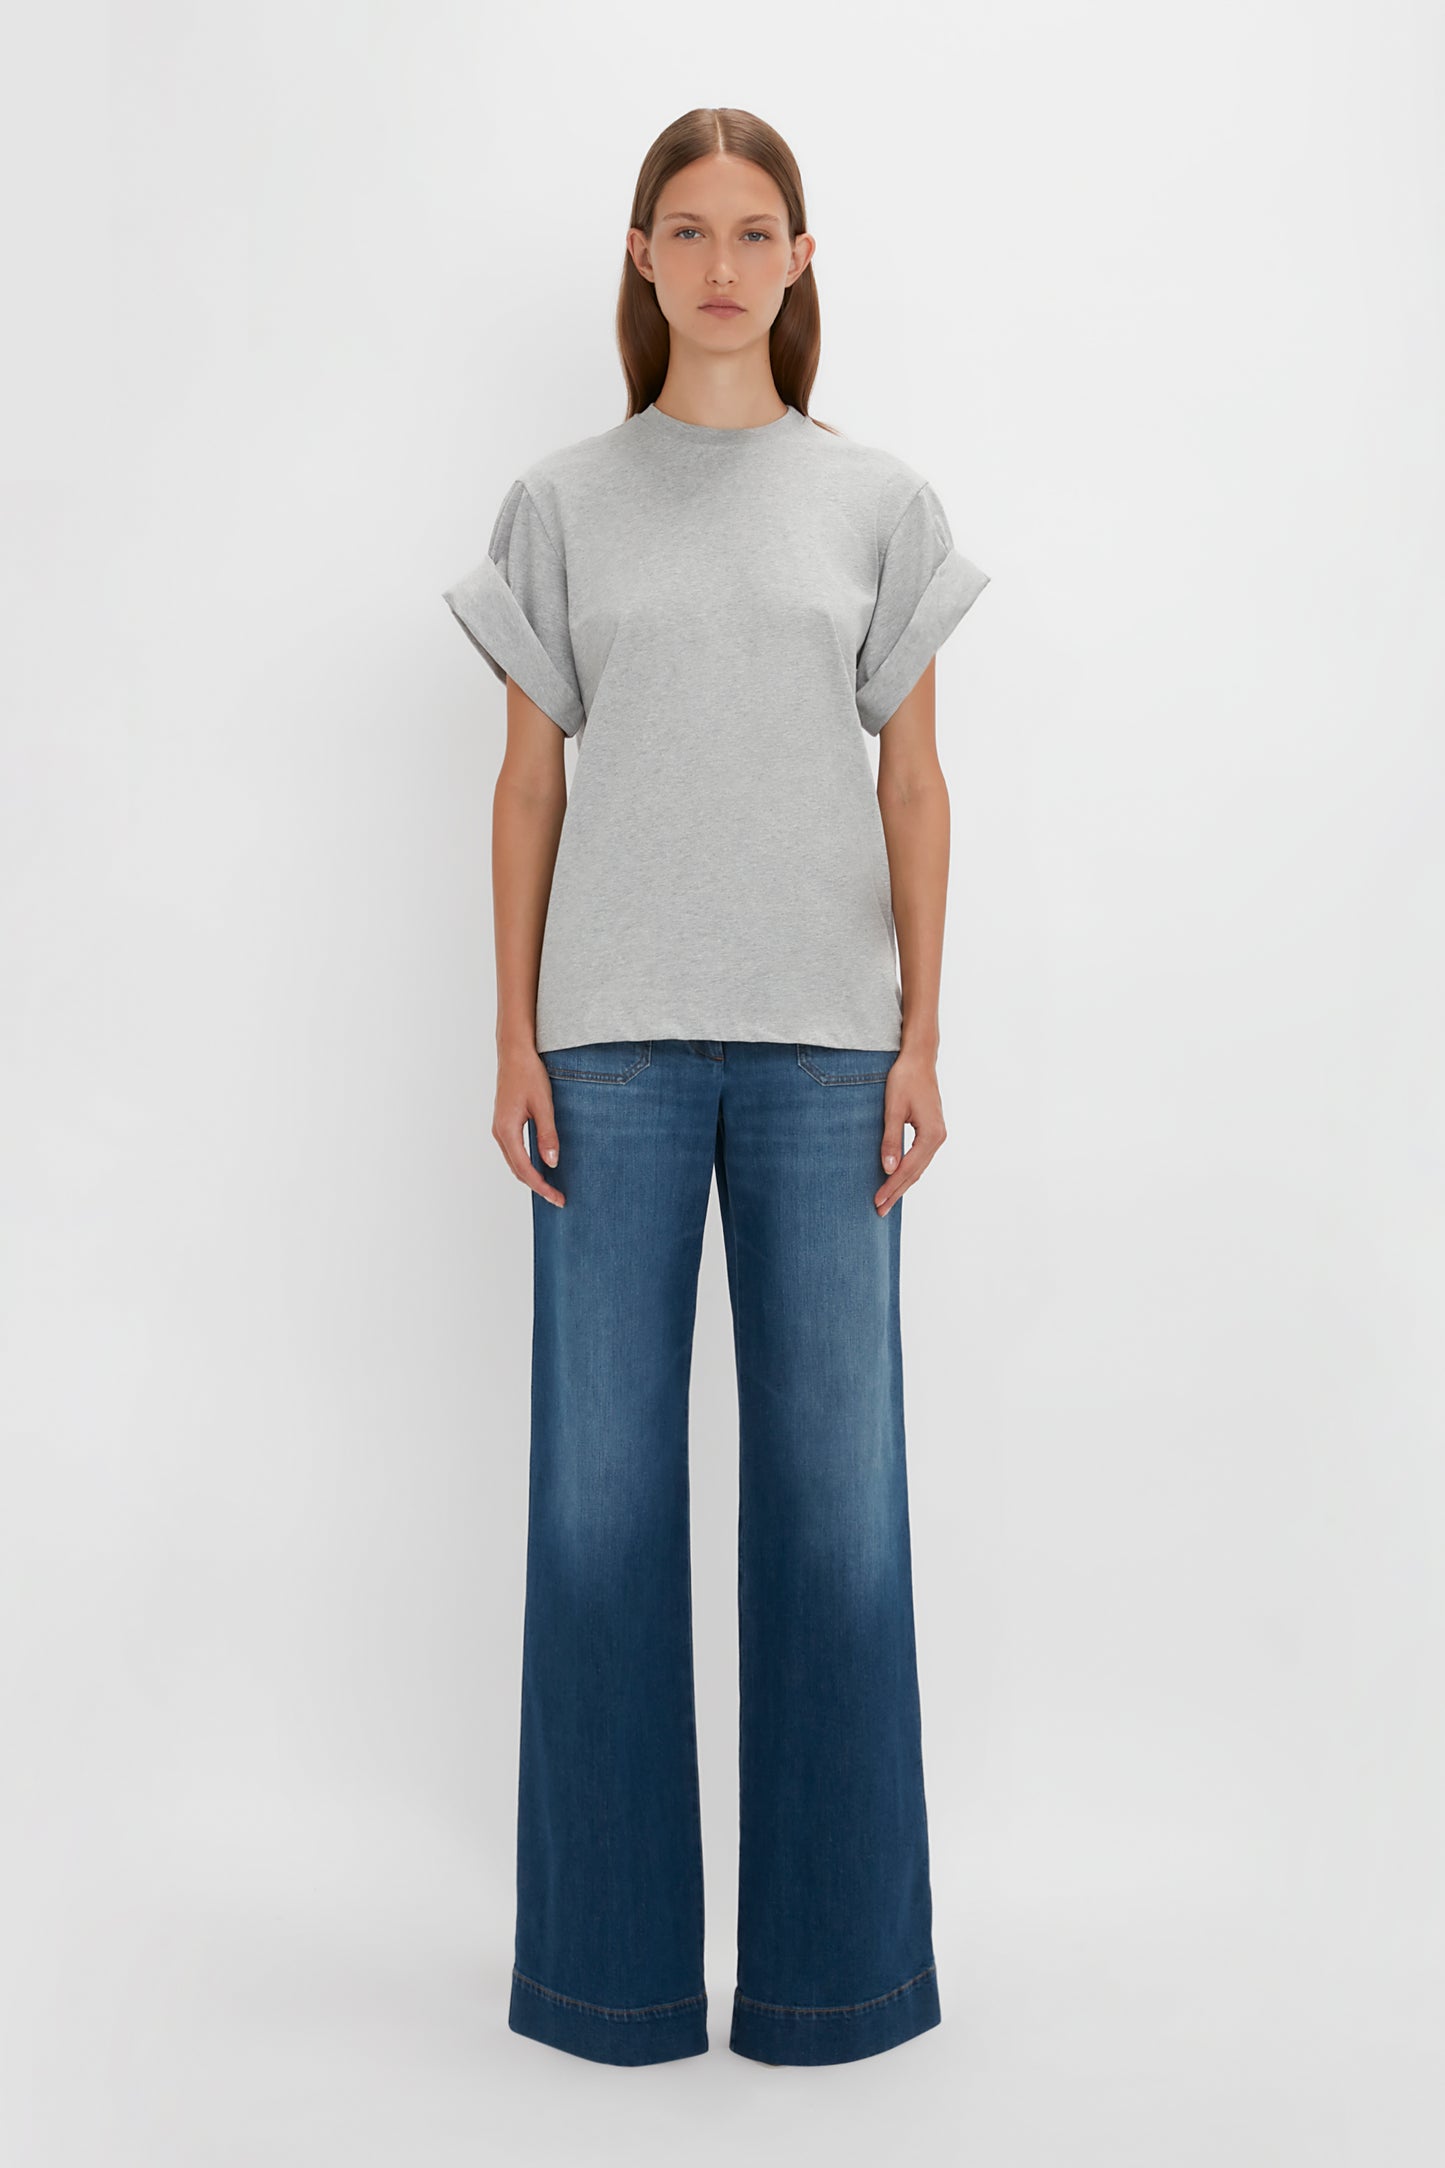 A woman in a Victoria Beckham Asymmetric Relaxed Fit T-shirt in Grey Marl and blue flared jeans standing against a white background.